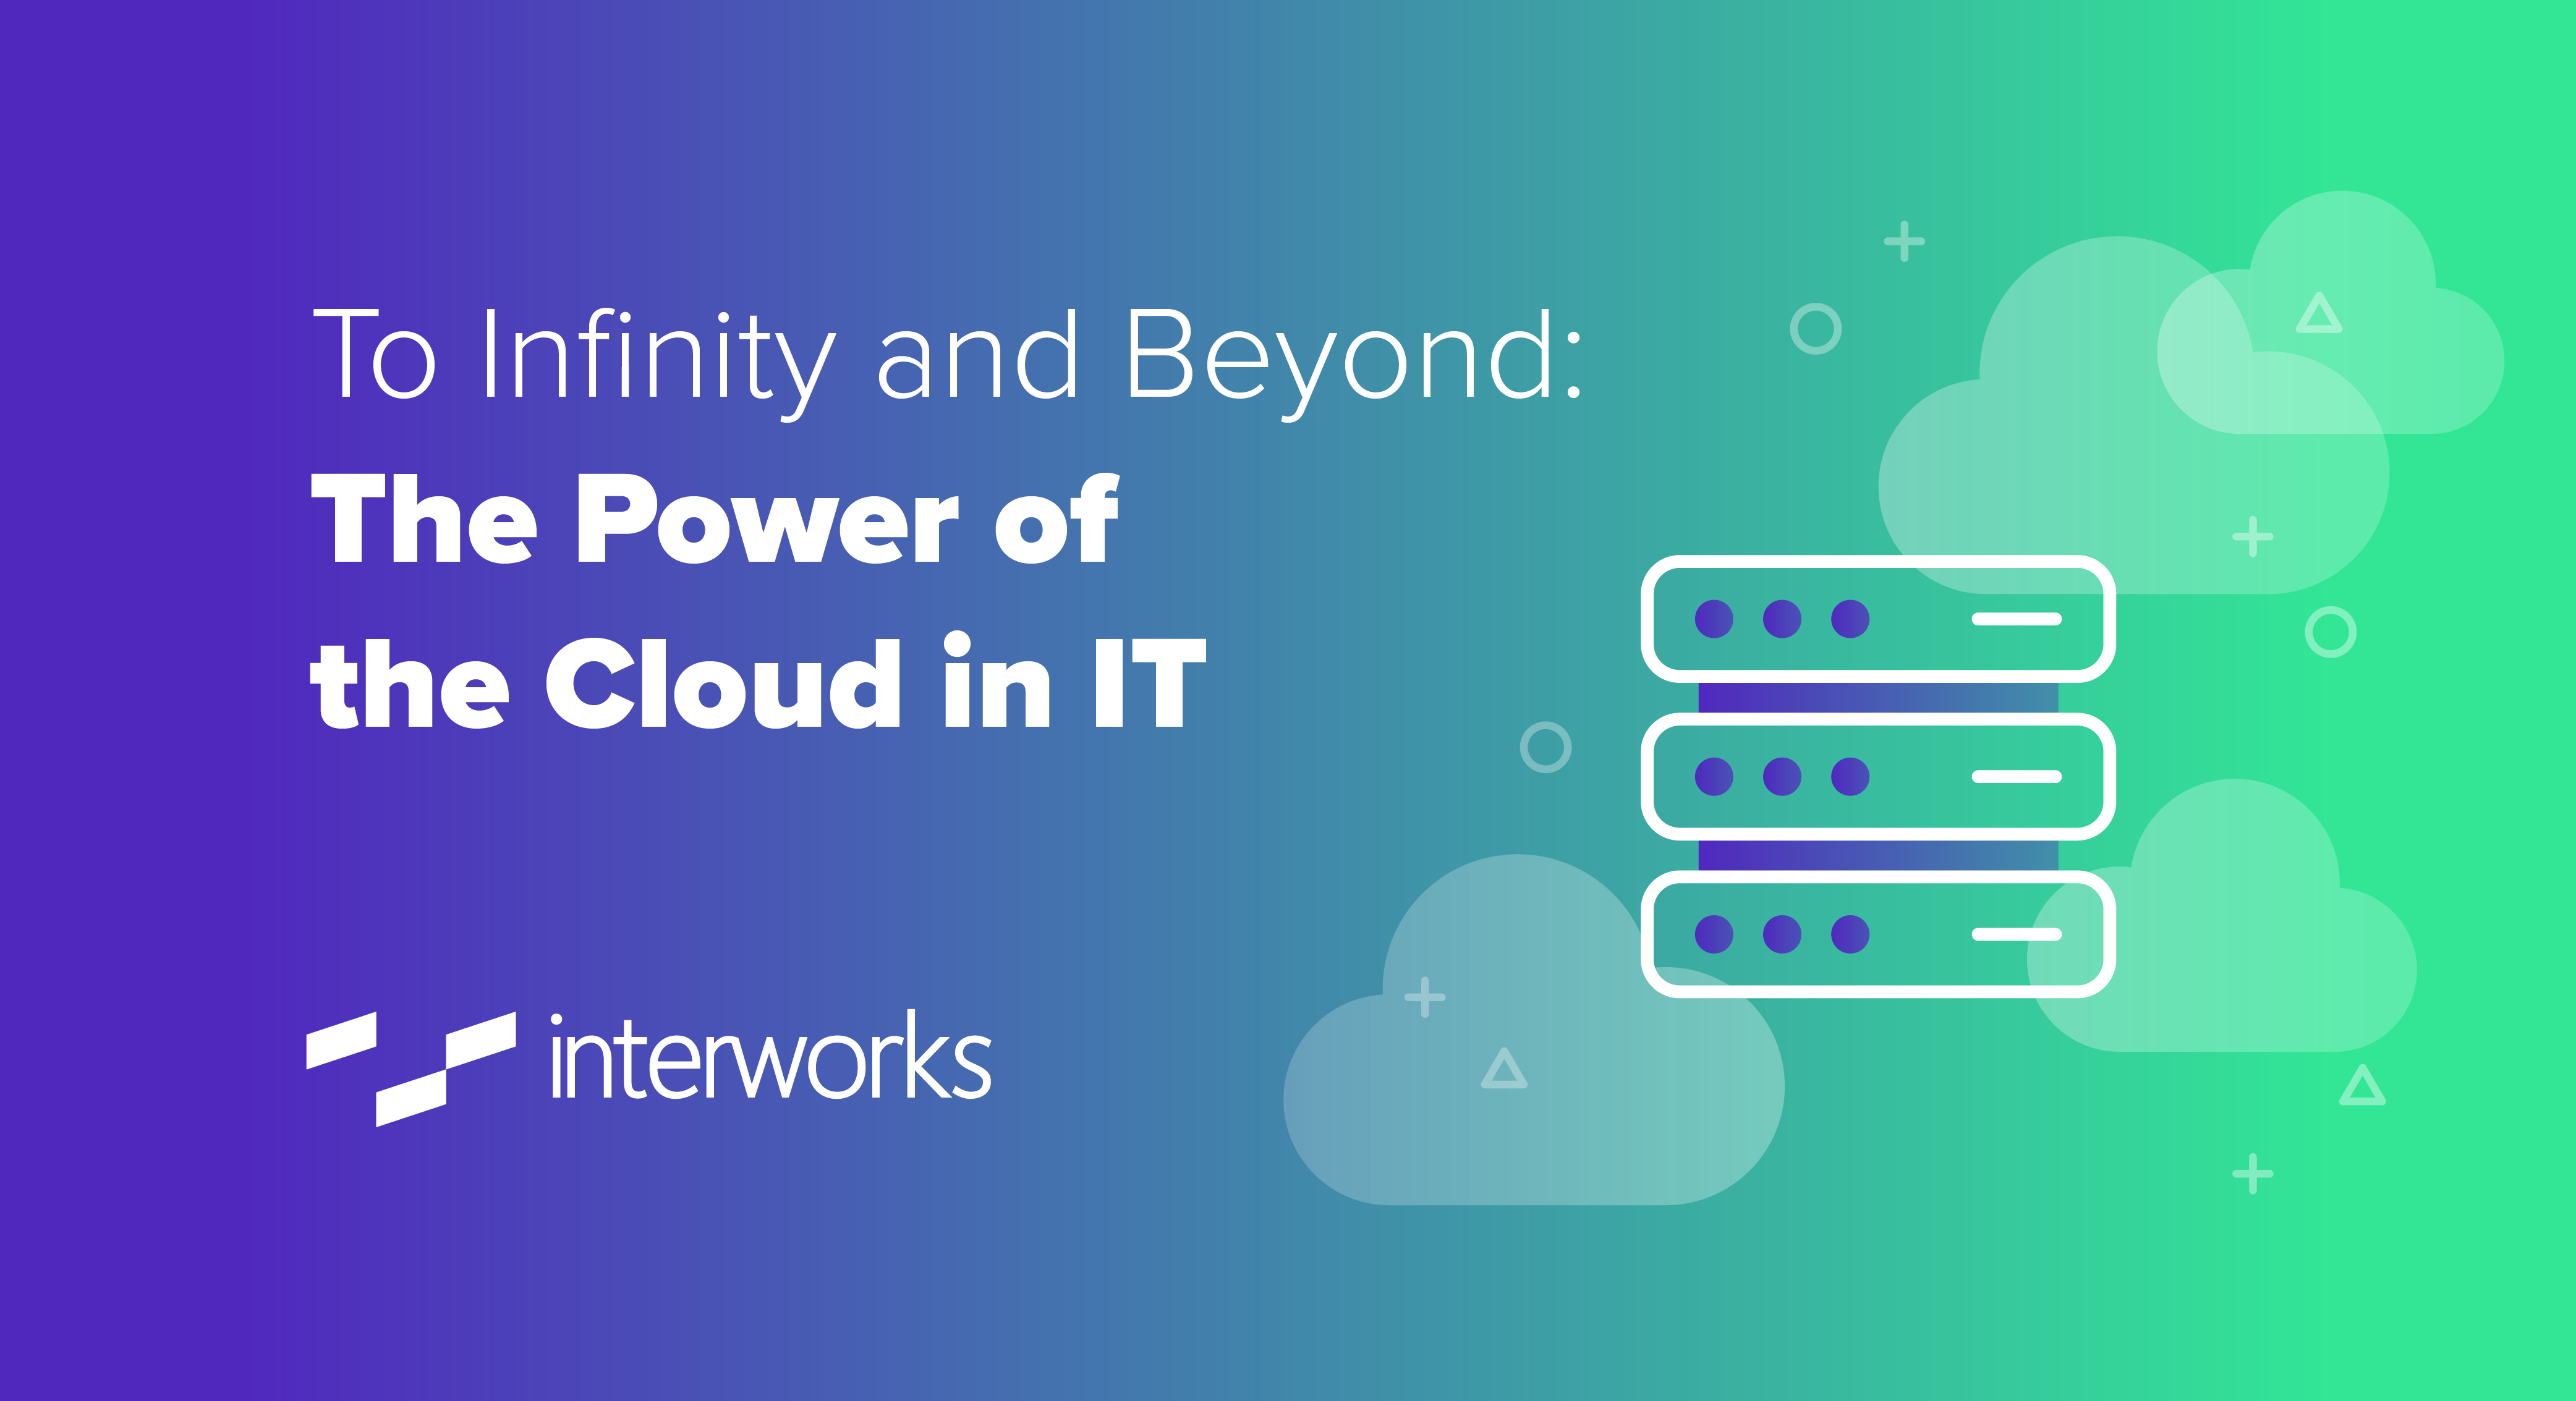 To Infinity and Beyond: The Power of the Cloud in IT